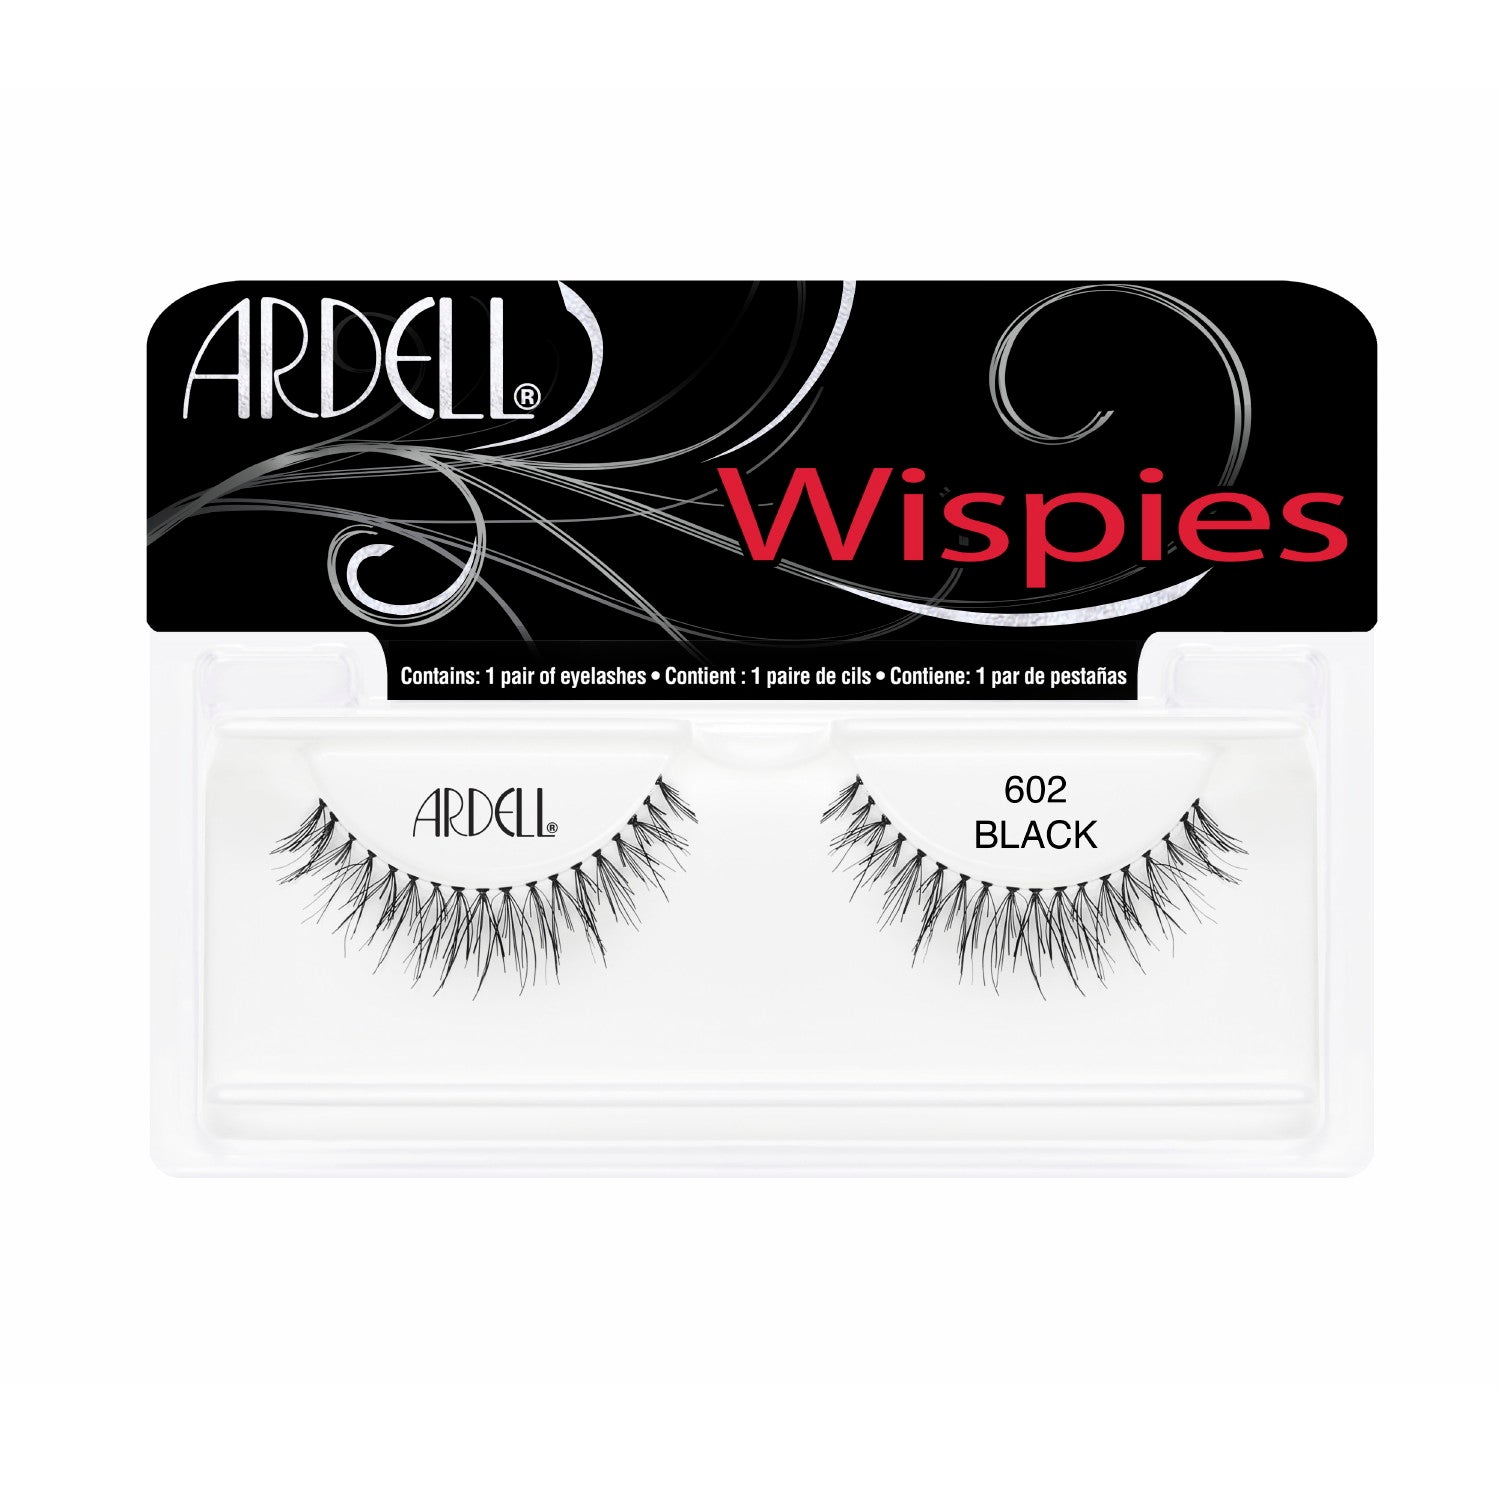 ARDELL Wispies Lashes